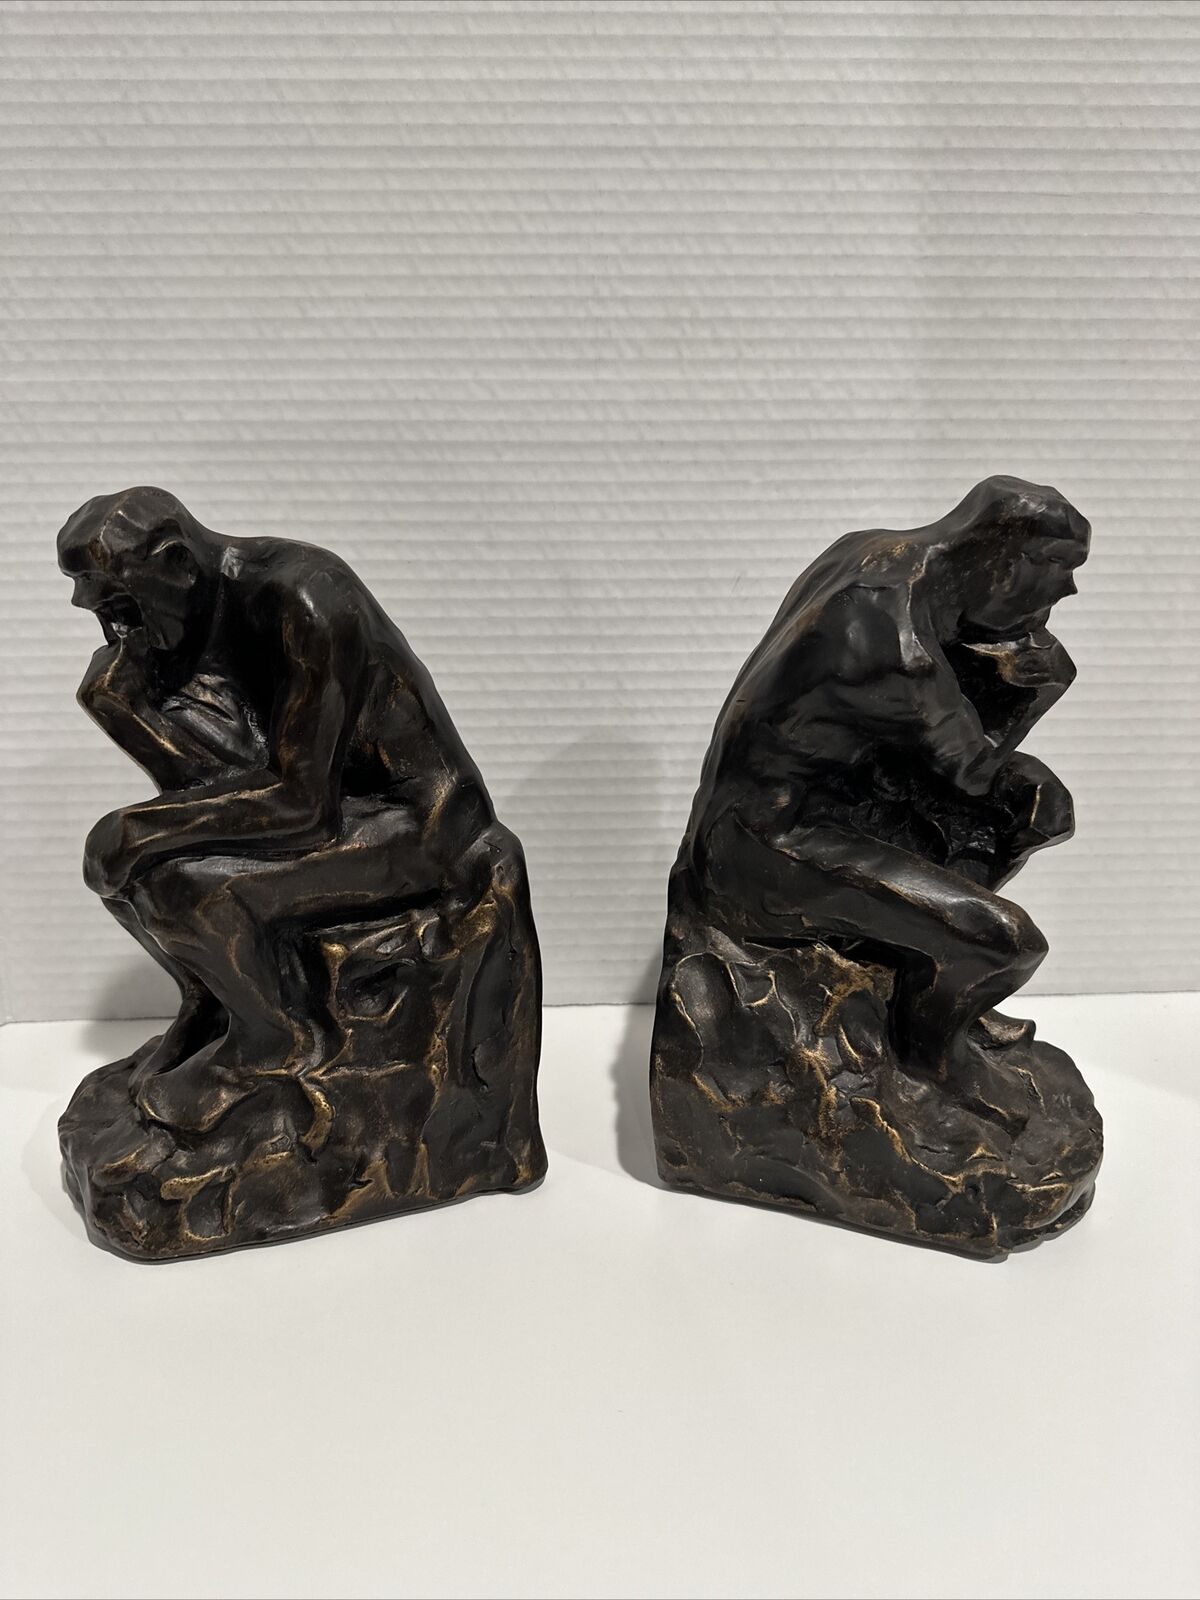 Vintage Set Of Rodin The Thinker Bookends 1999 Barnes And Noble W/free Tote